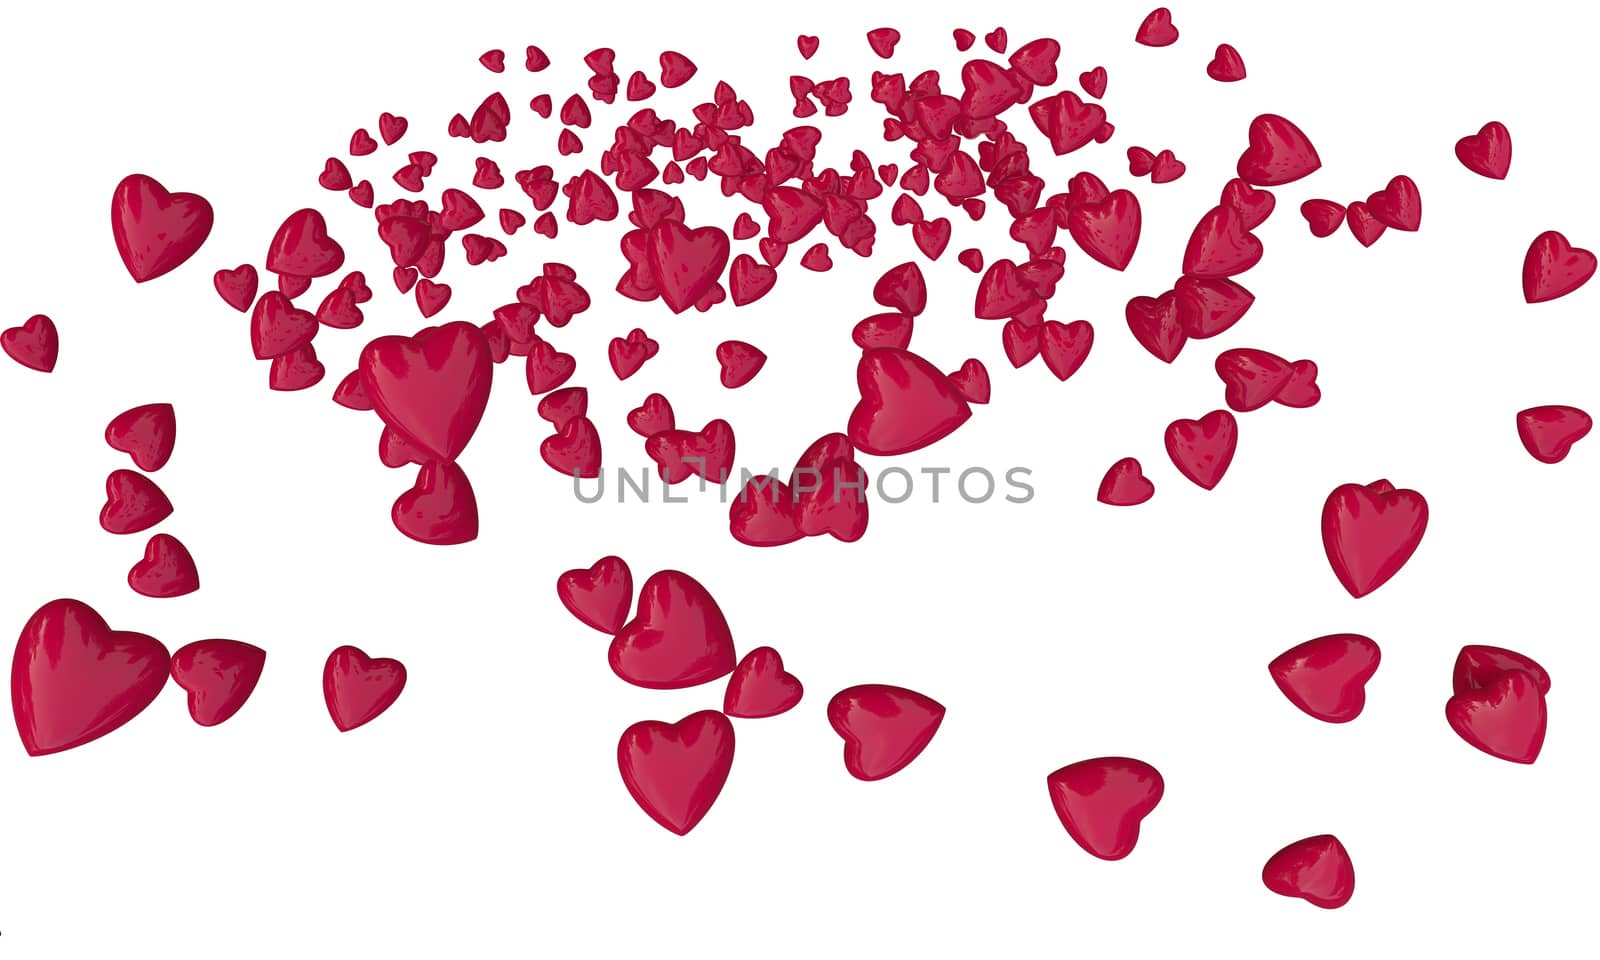 concept of love made with 3d hearts in red isolated on white with clipping path